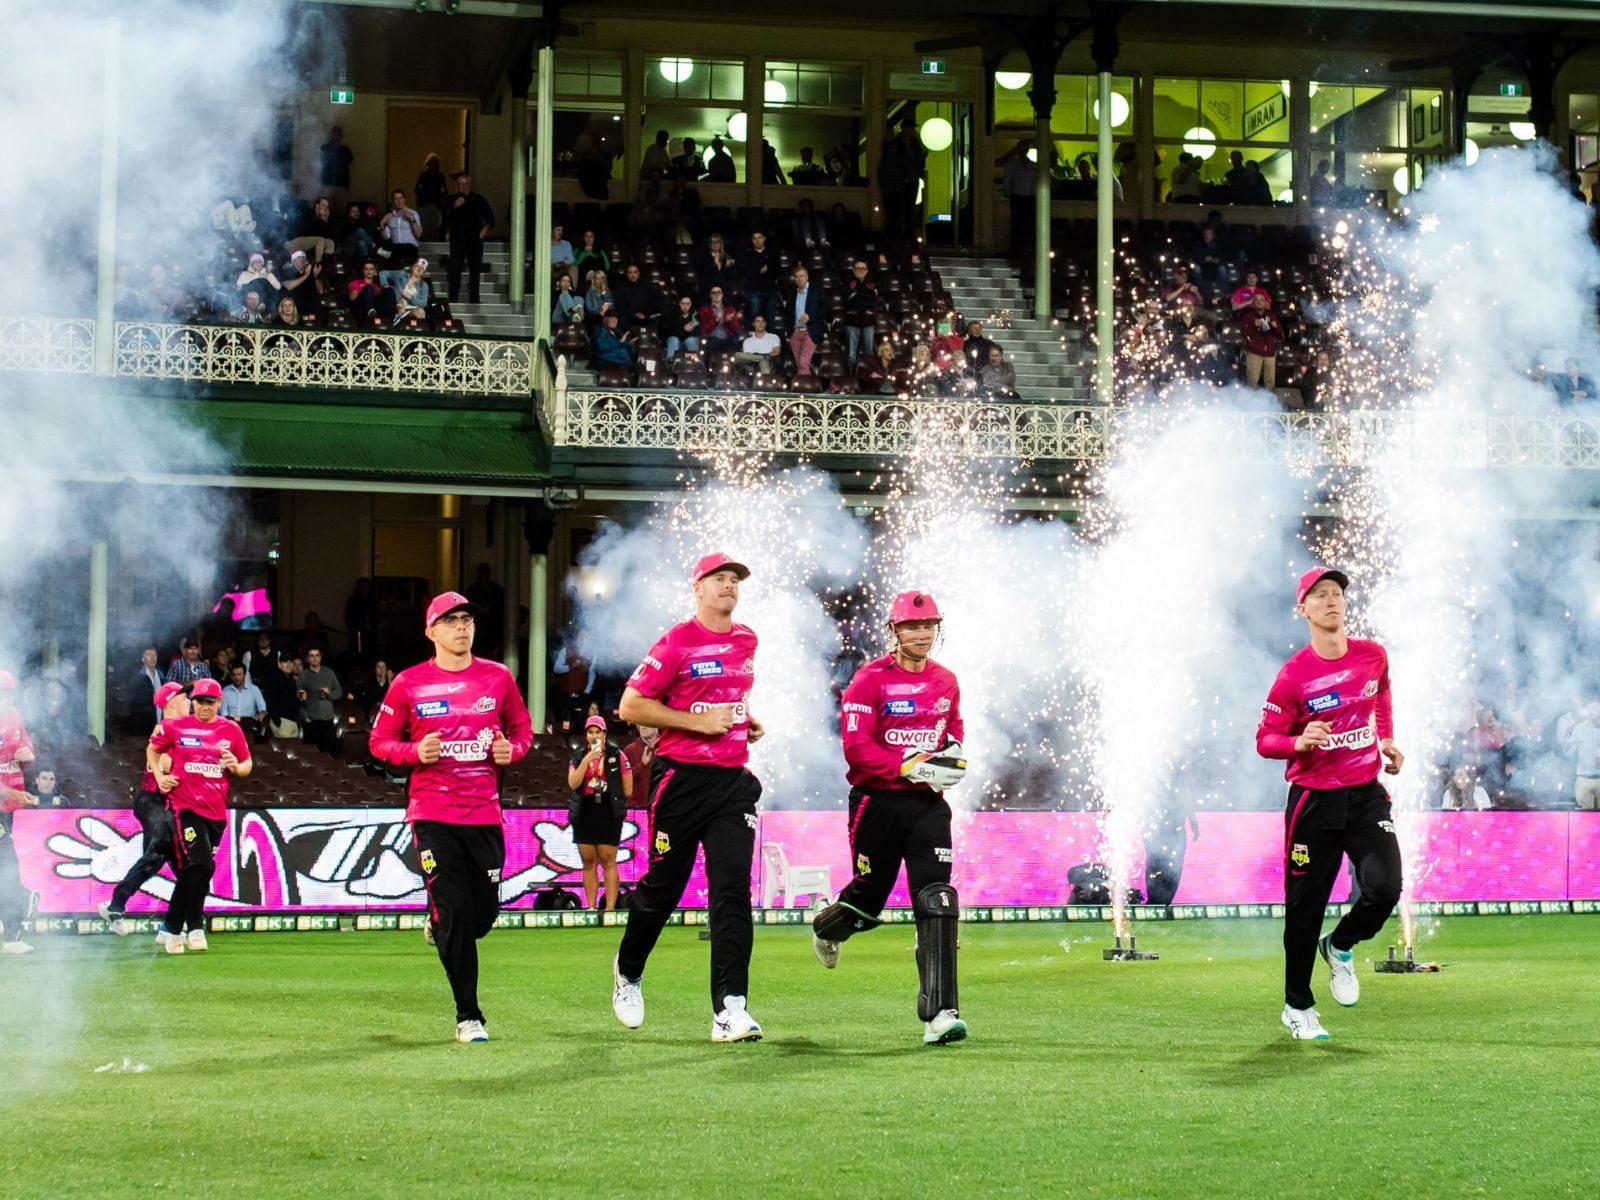 BBL 2022-23 Sydney Sixers vs Sydney Thunder Live Streaming When and Where to Watch Live Coverage on Live TV, Online